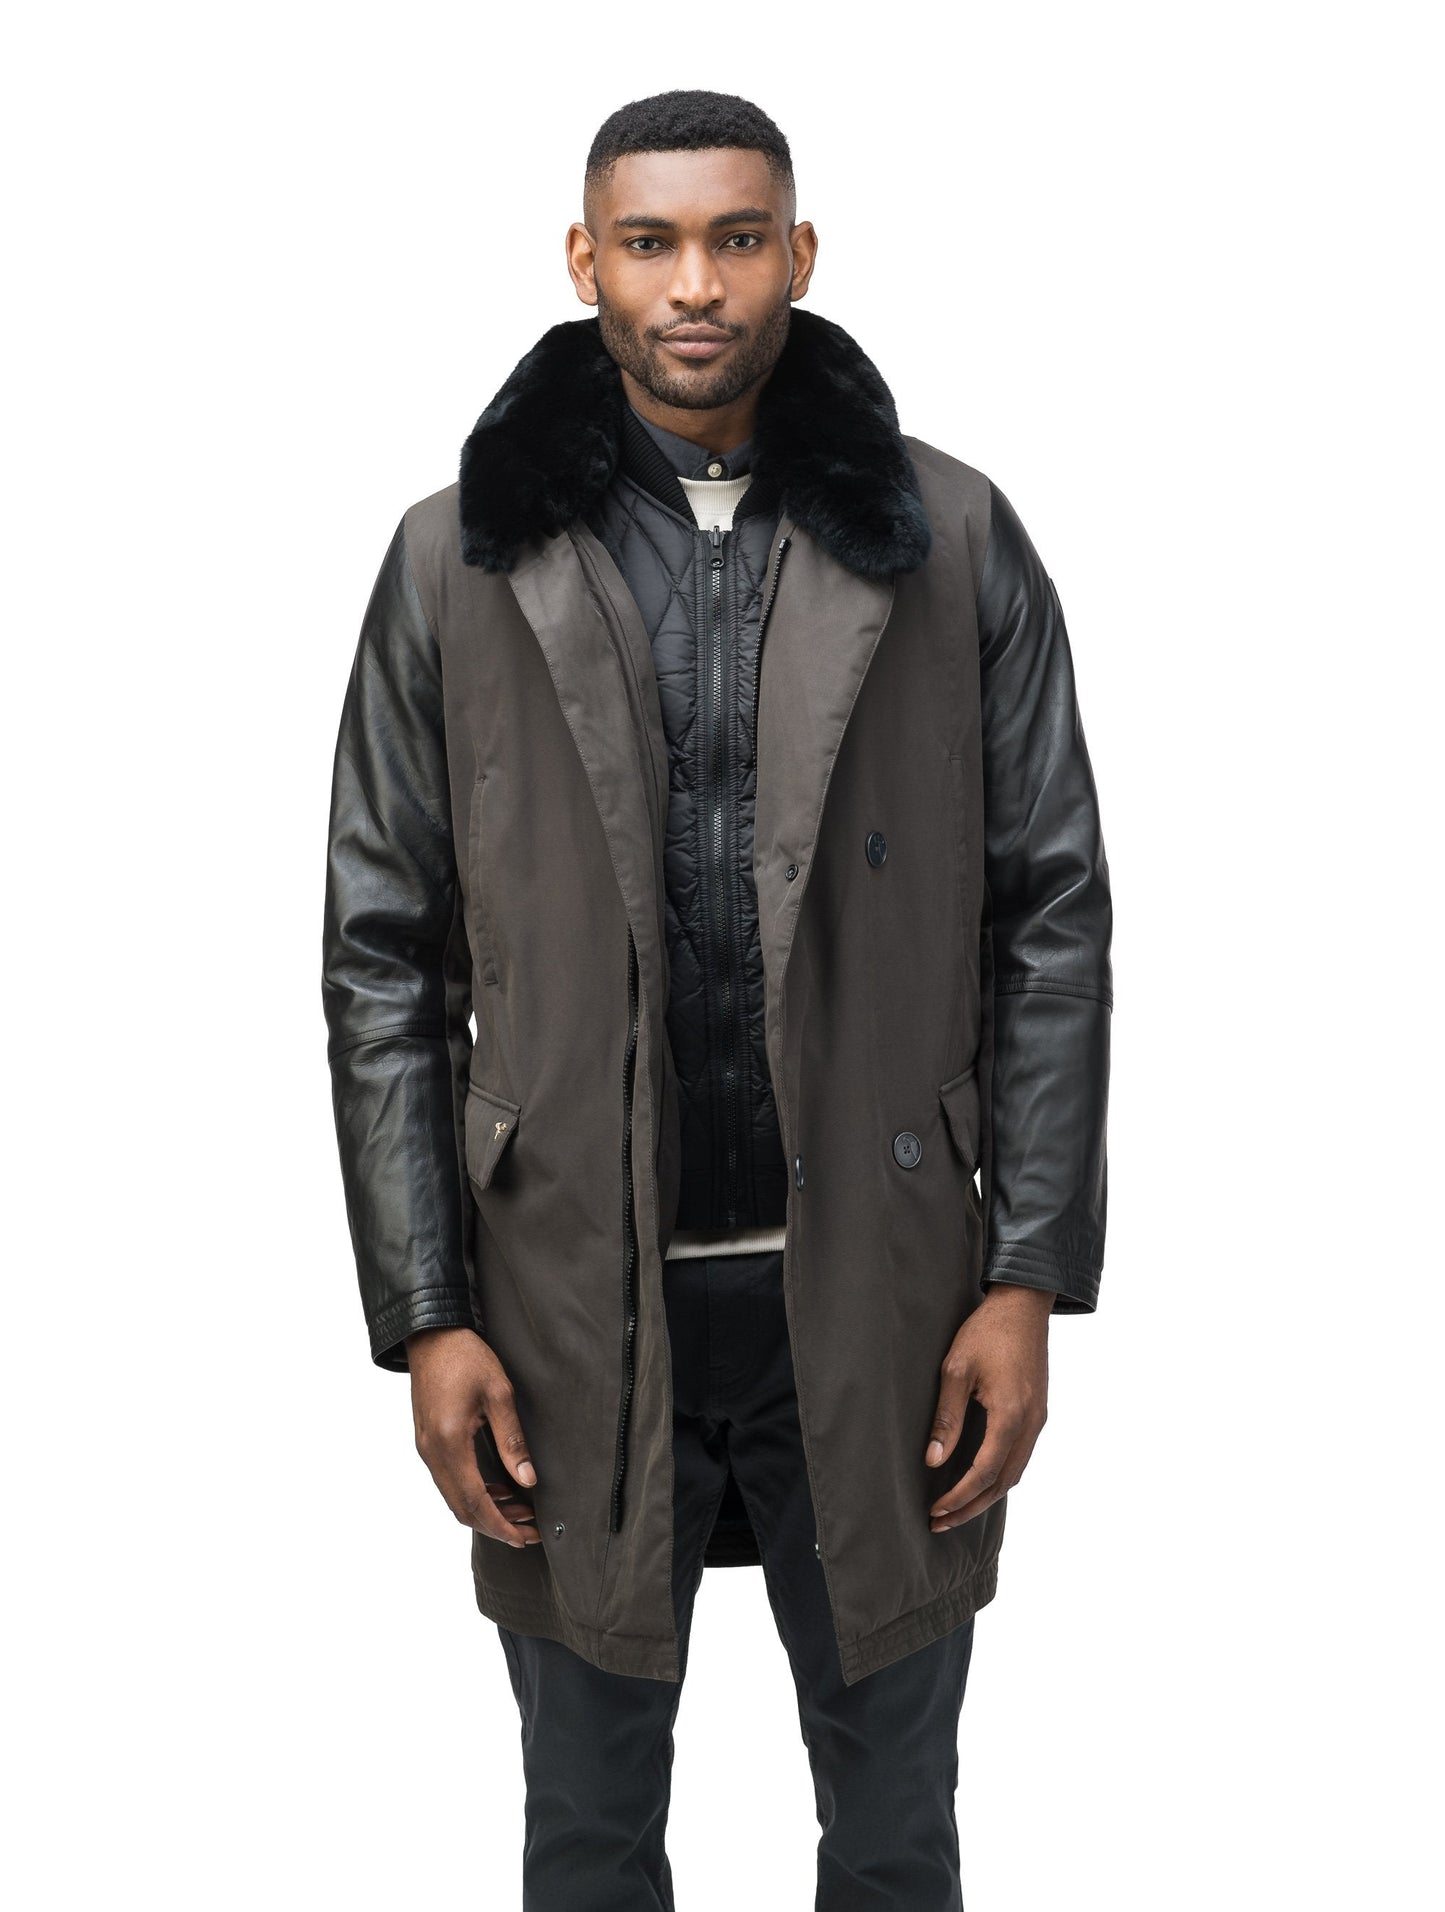 Men's down filled coat with machine washable leather sleeves, removable liner, and Rex Rabbit fur ruff in Brown